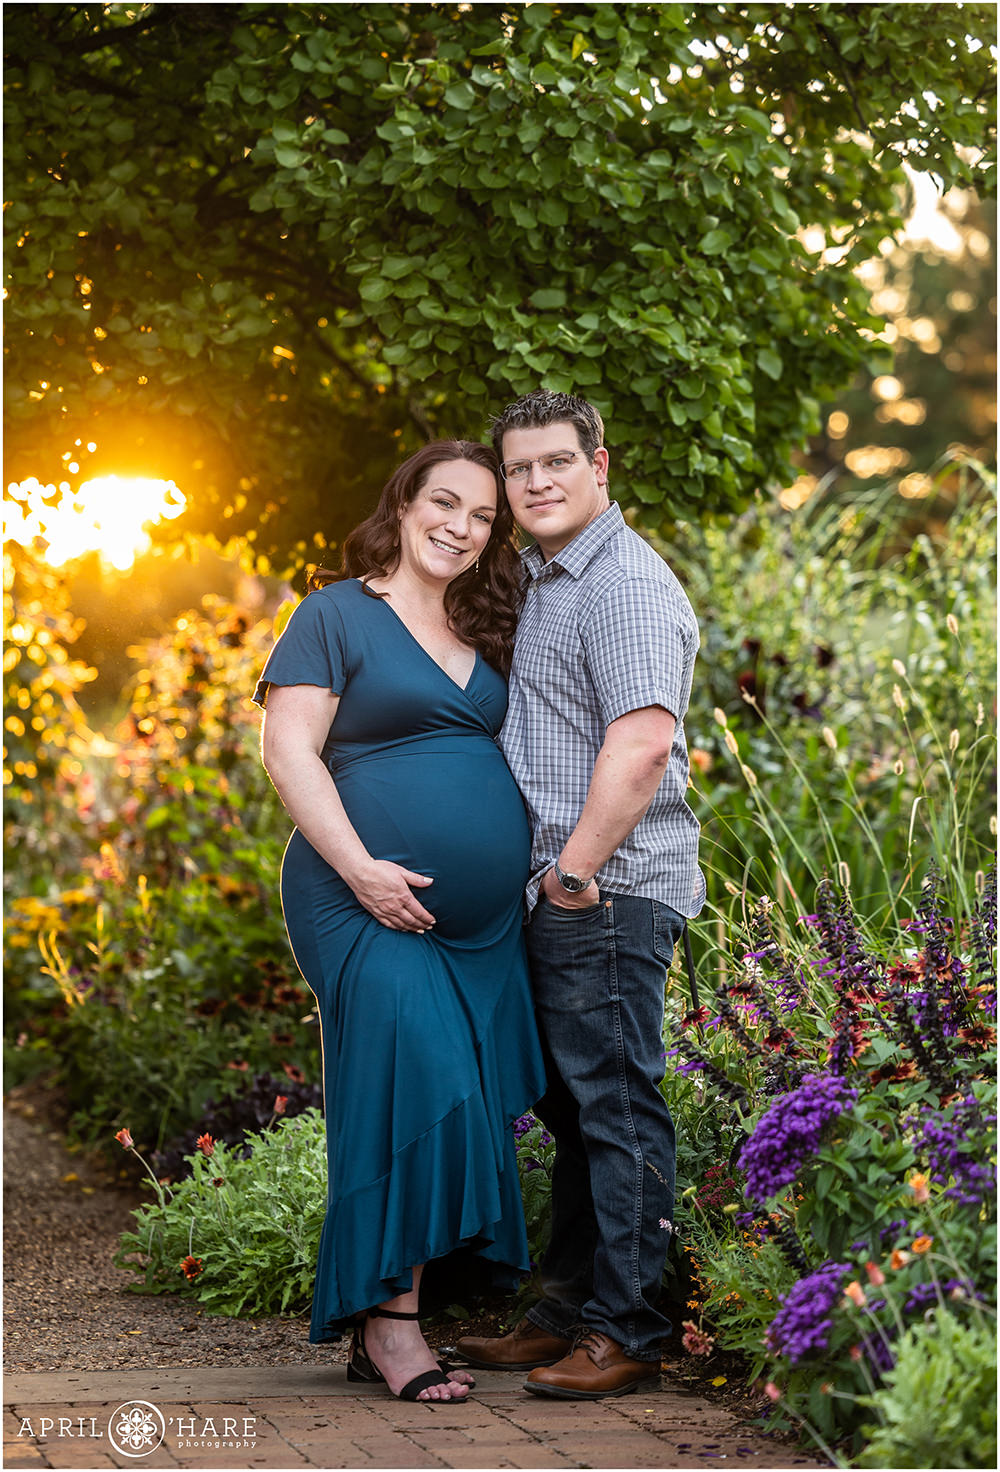 Couple expecting their 2nd child are photographed in a gorgeous sunset garden setting for their maternity portraits